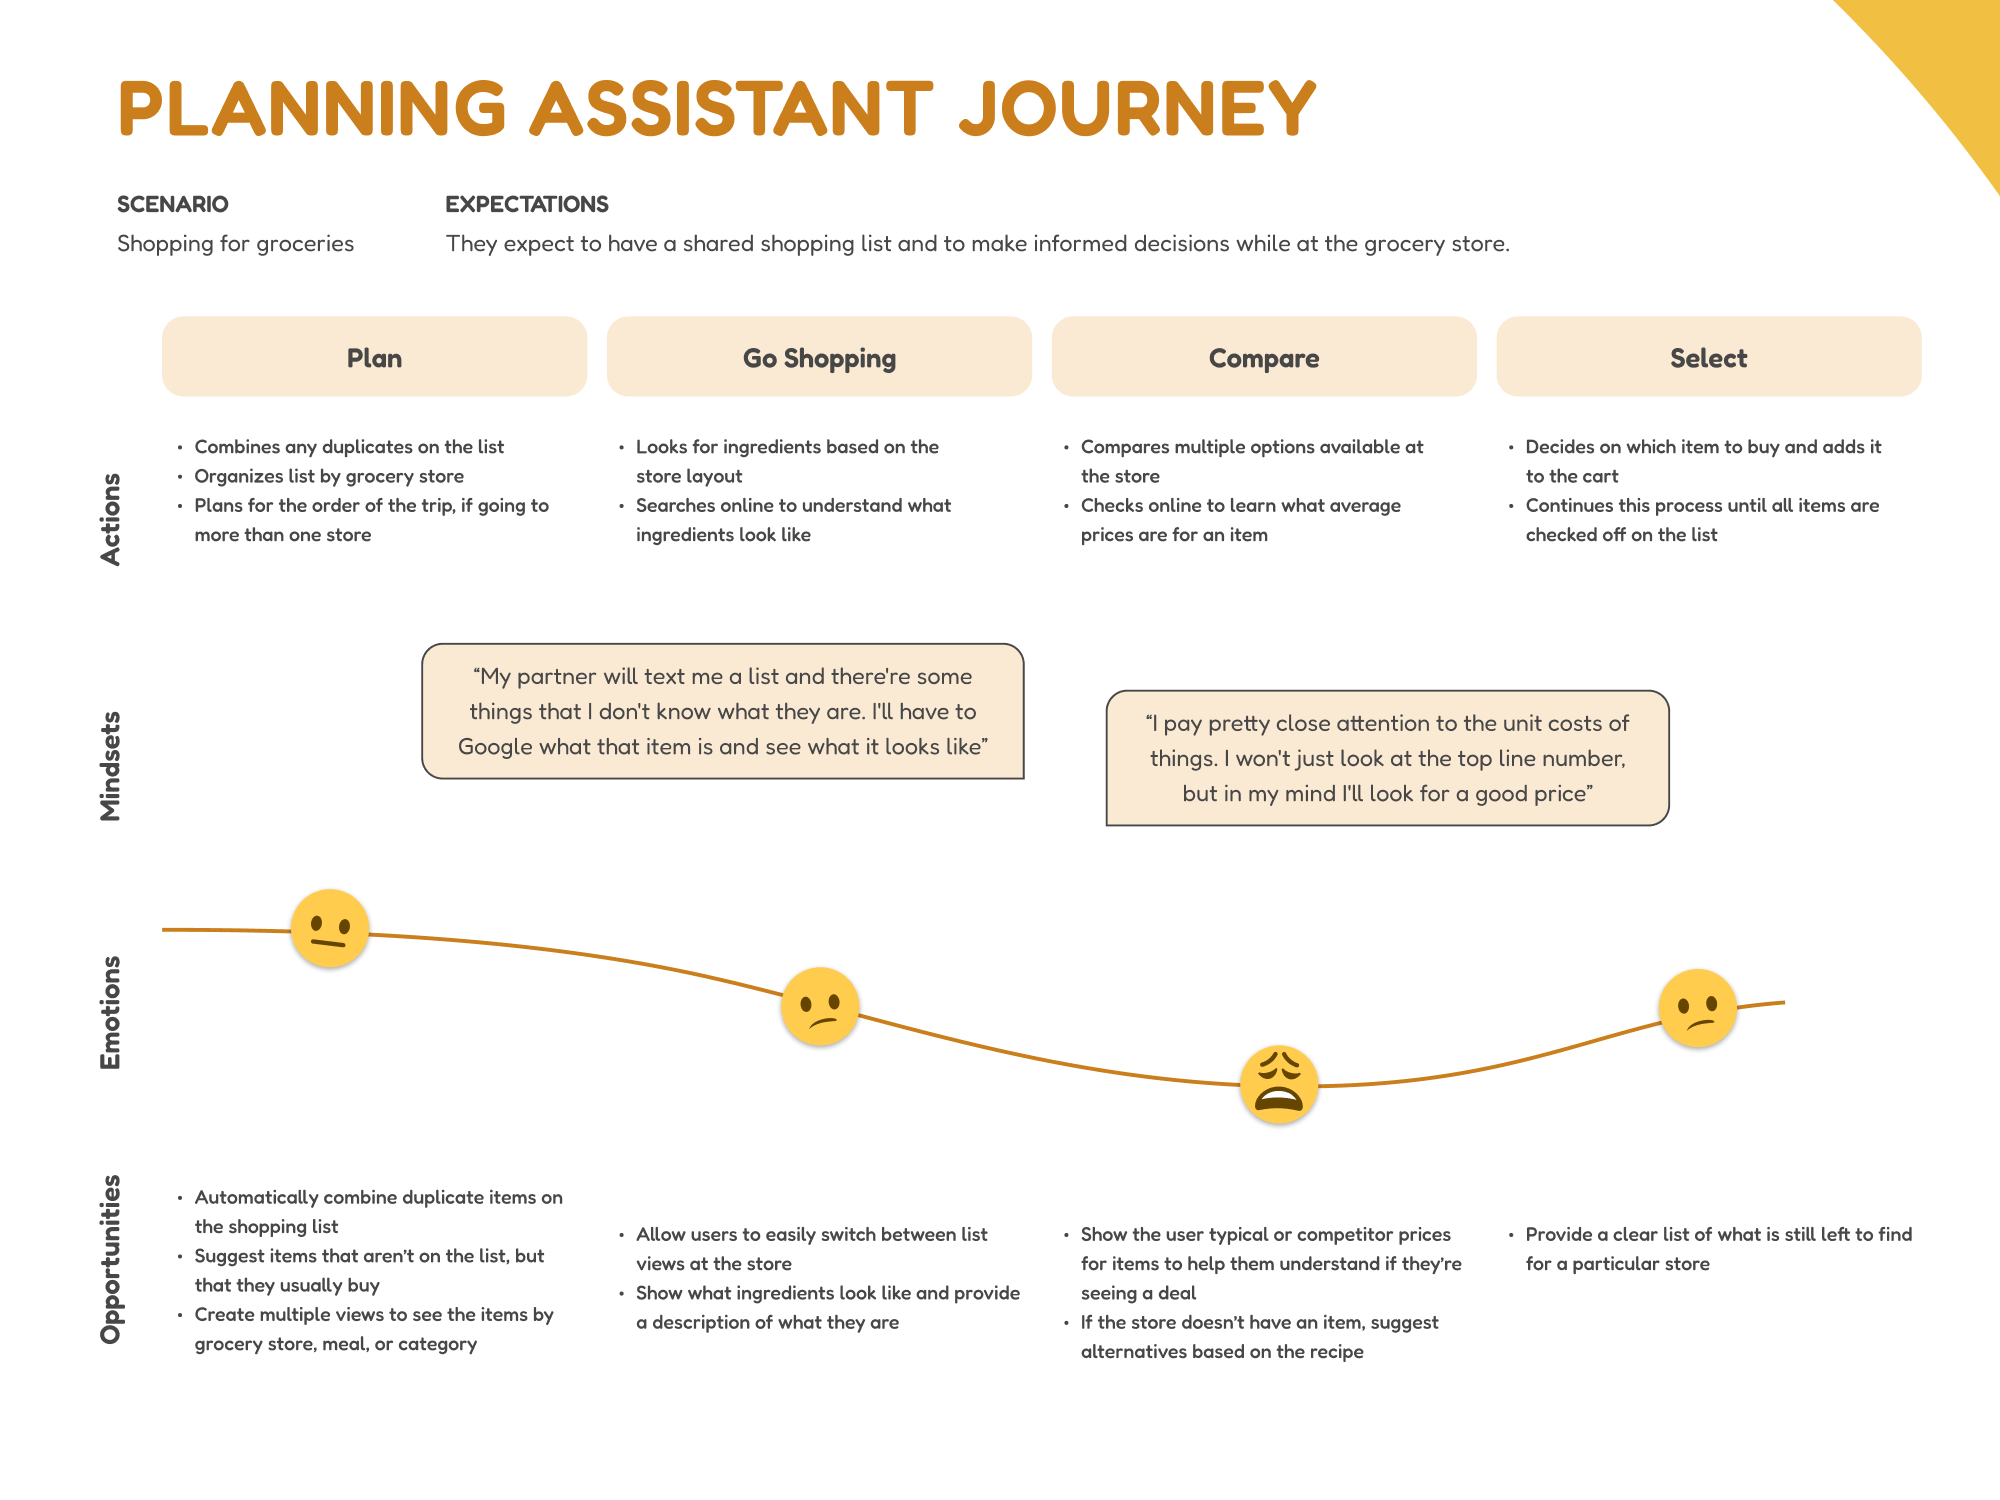 A customer journey map for the planning assistant user type.